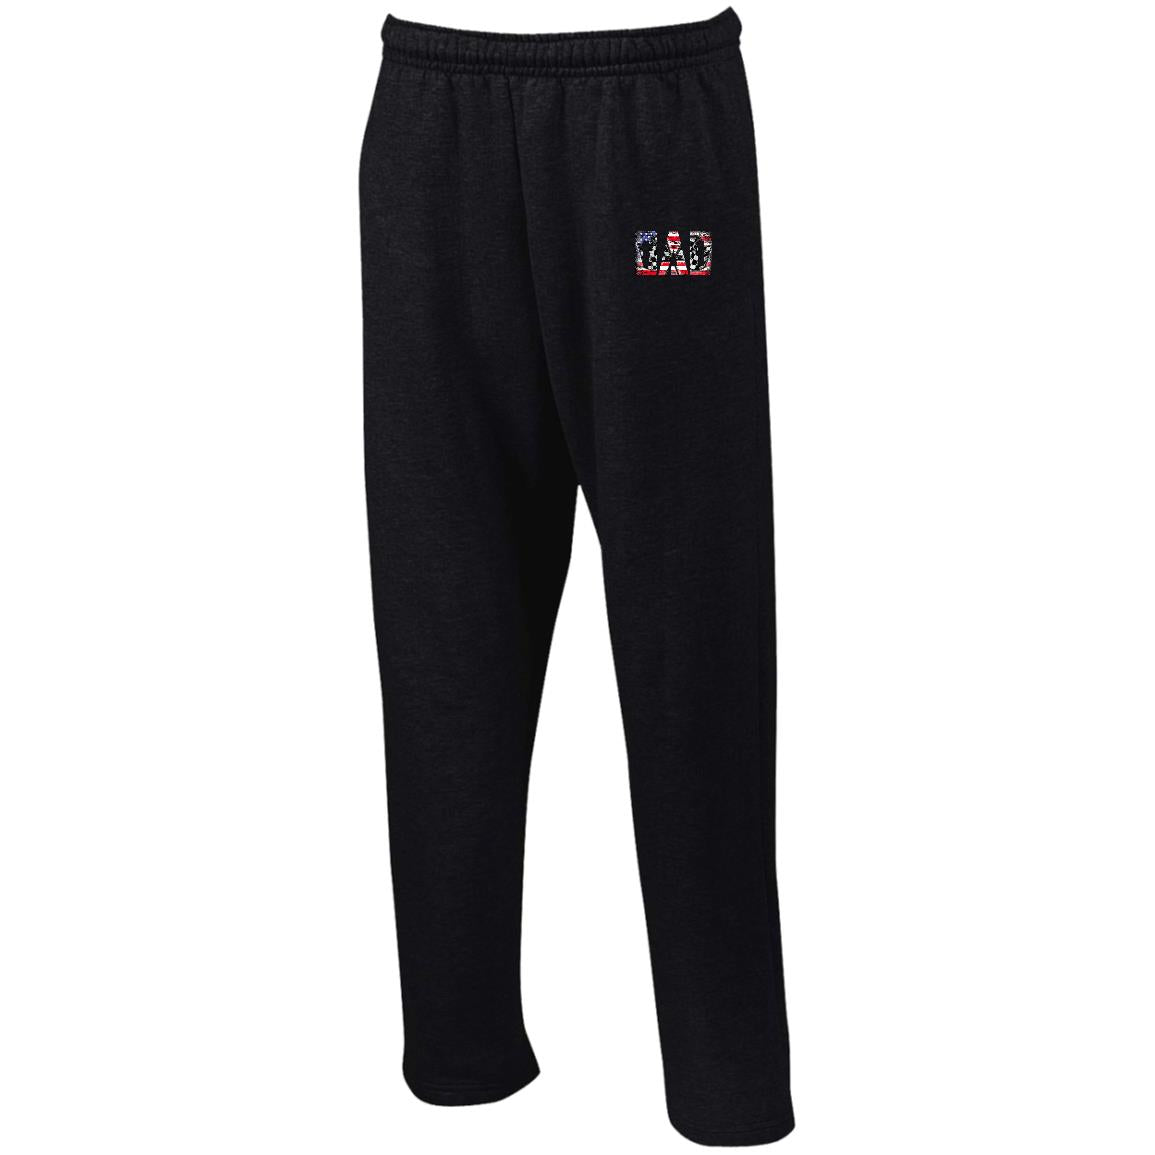 USA Racing Dad Open Bottom Sweatpants with Pockets